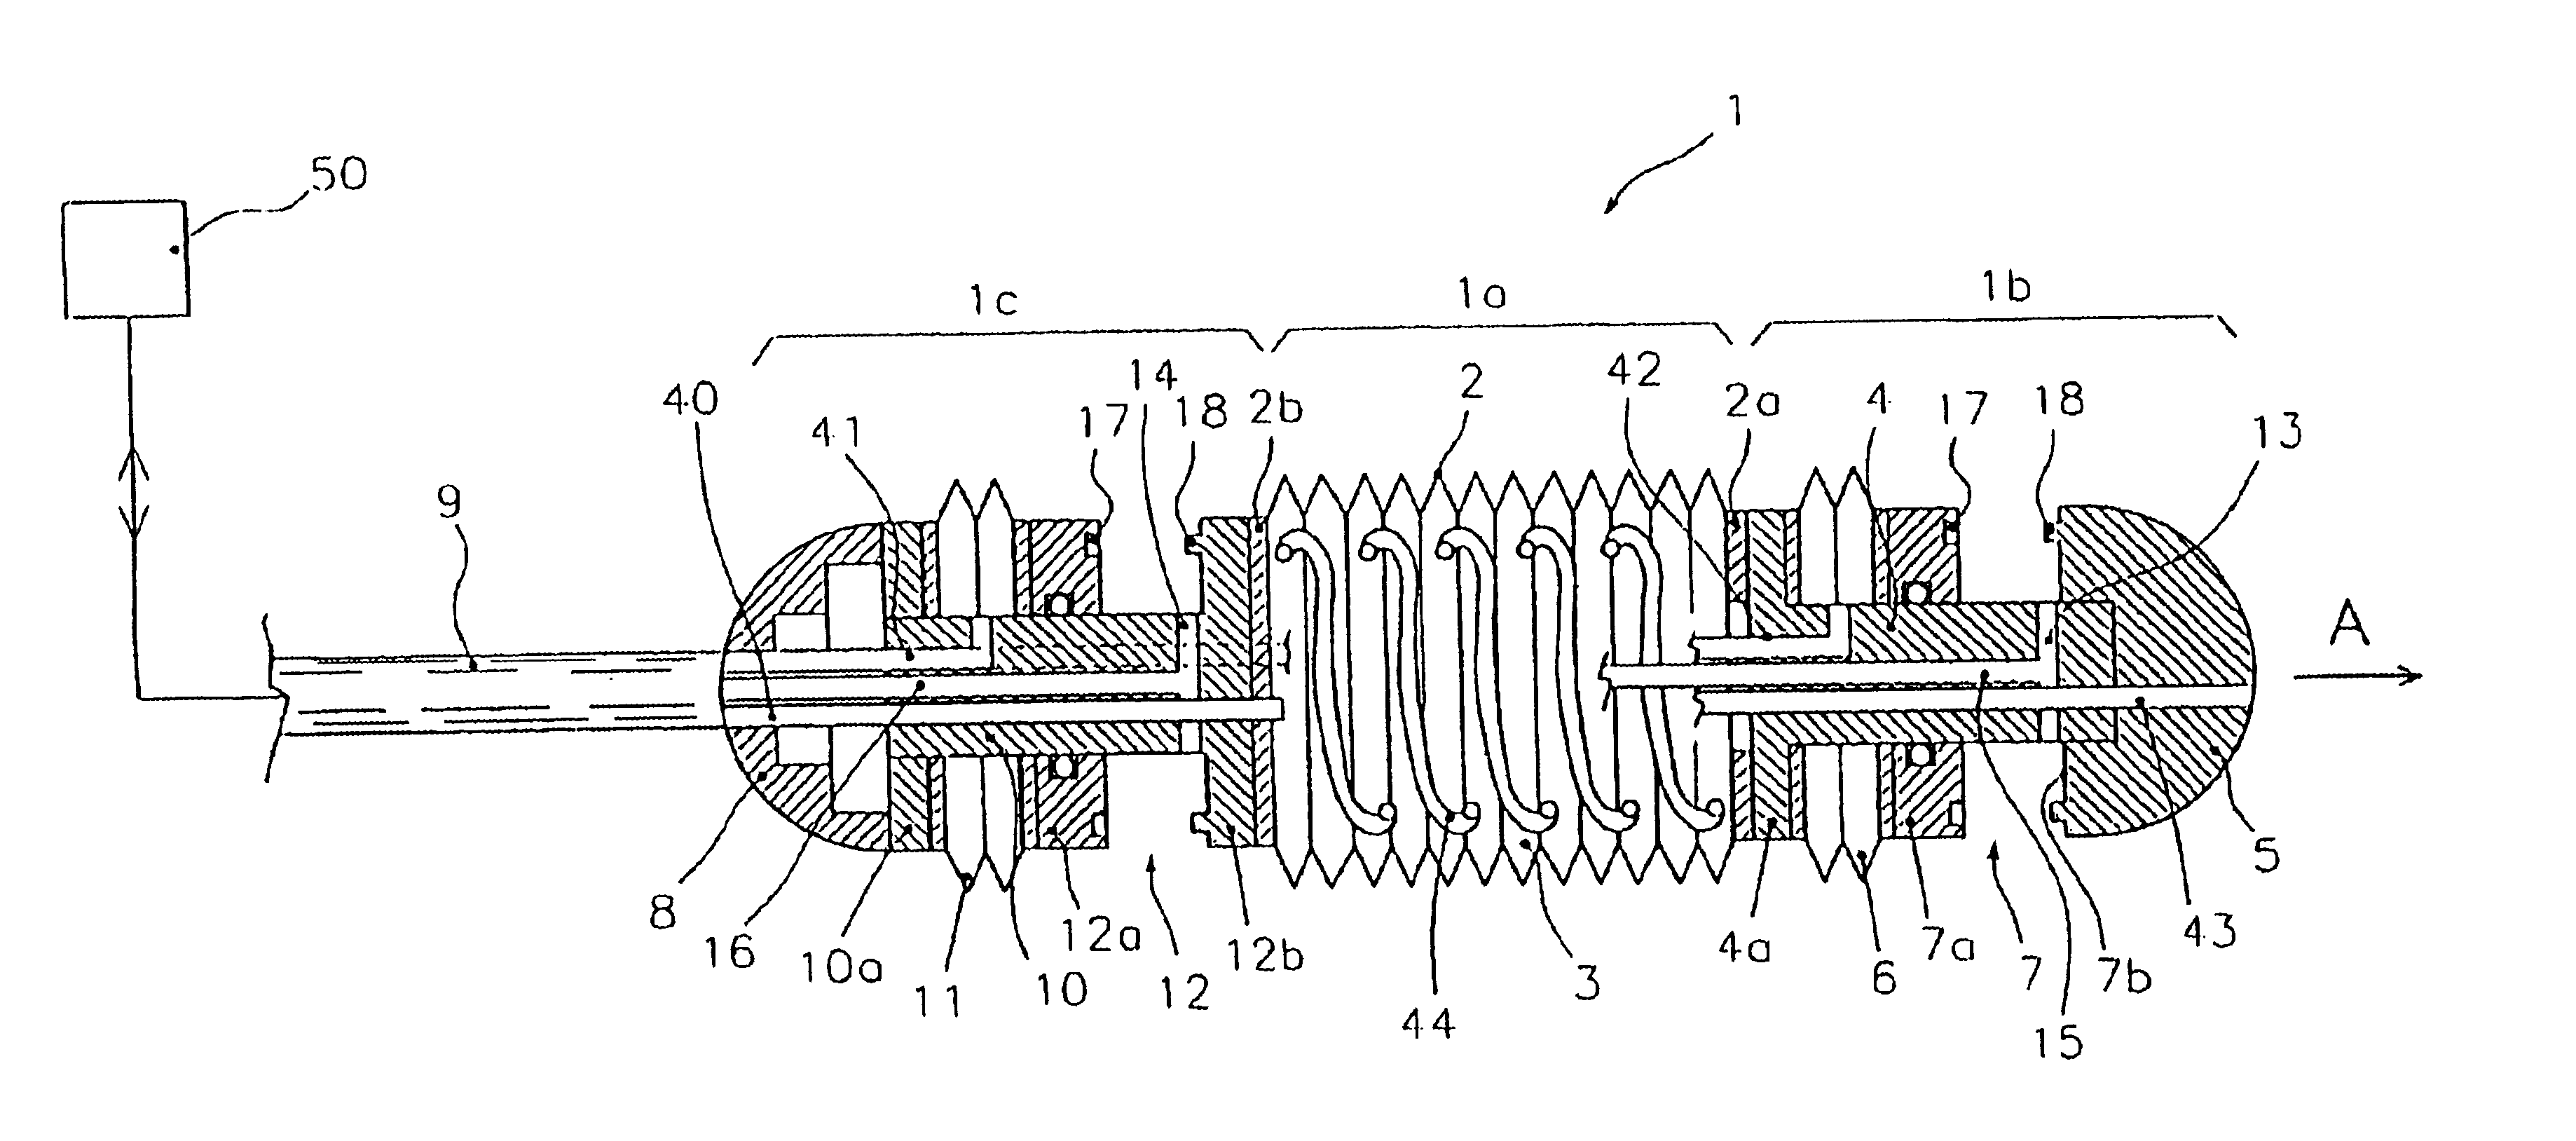 Endoscopic device for locomotion through the gastro-intestinal tract